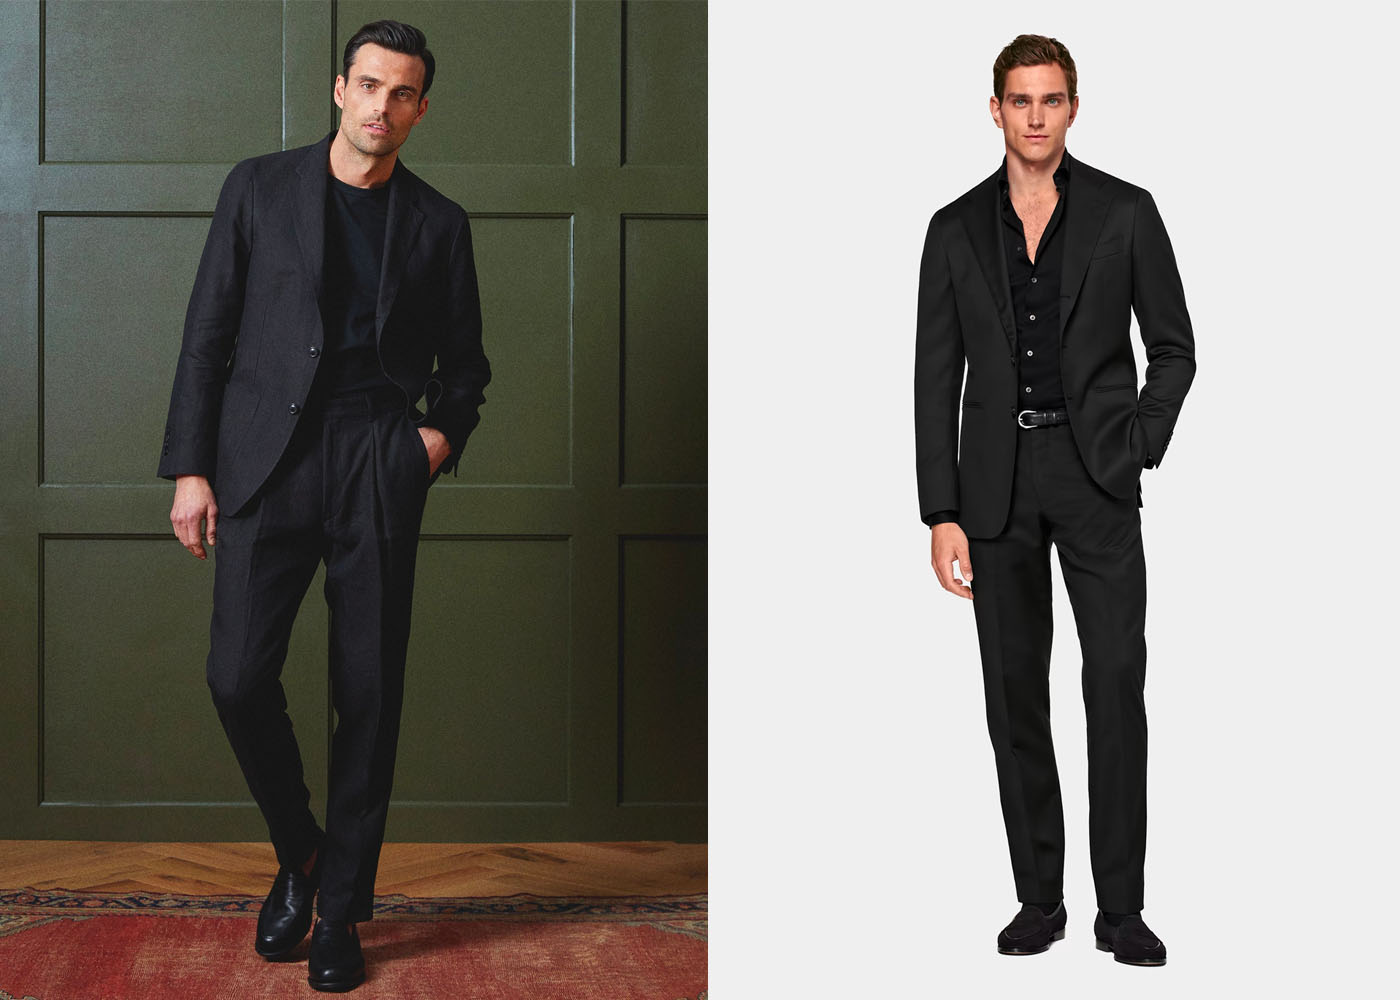 Black Dress Pants with Black Print Tie Outfits For Men (5 ideas & outfits)